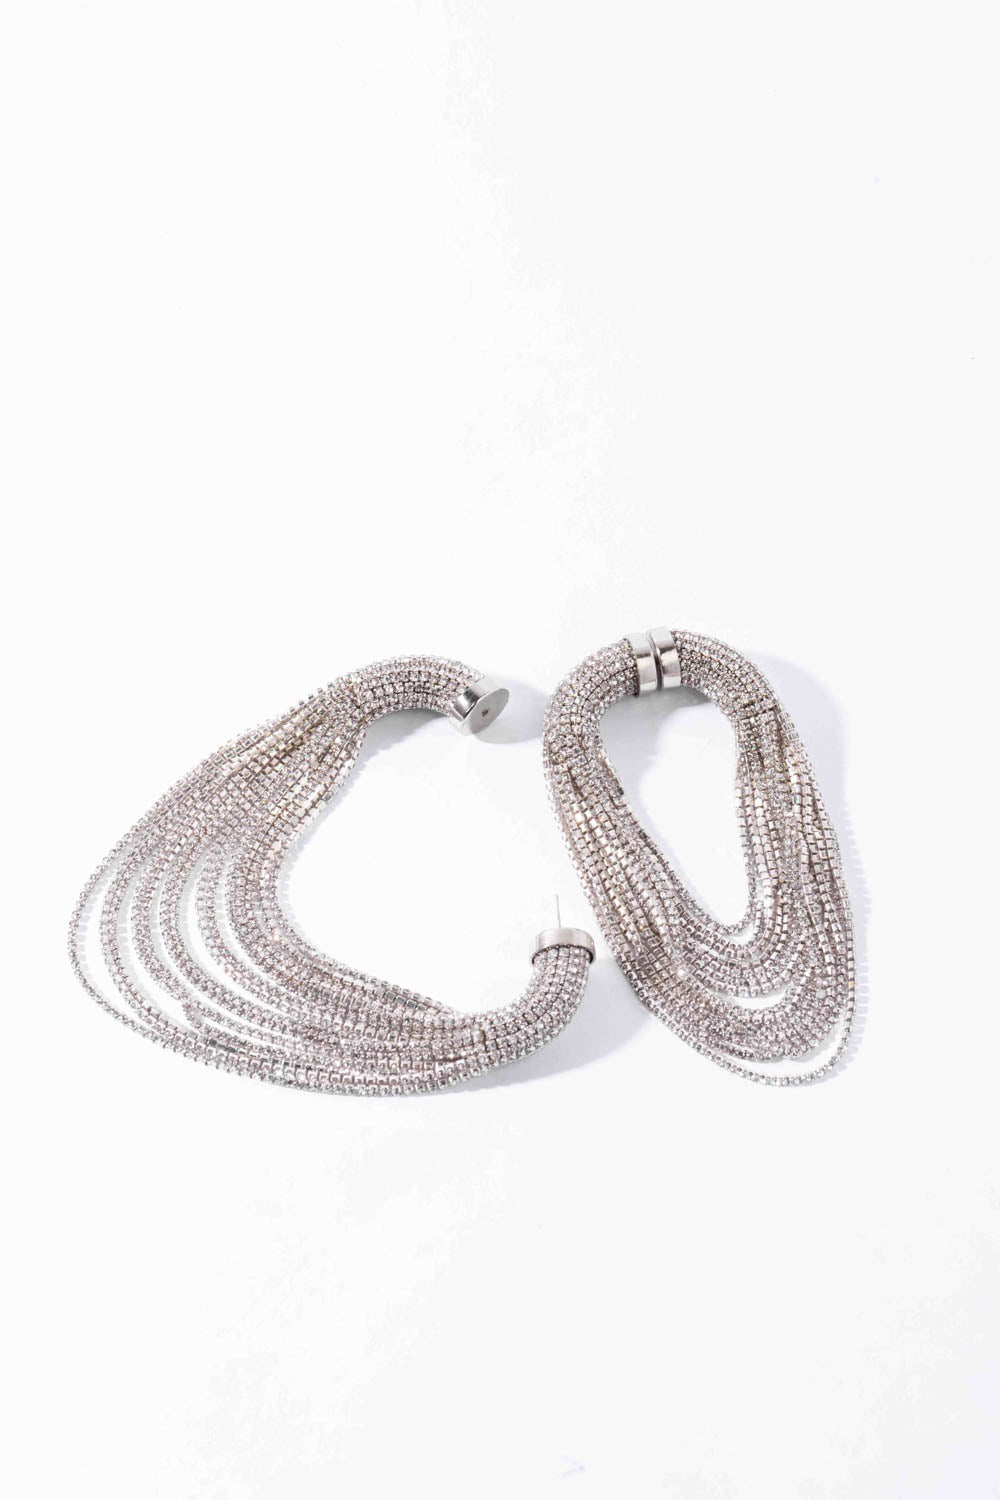 Amama,Infinity Fall Danglers In Sparkling White